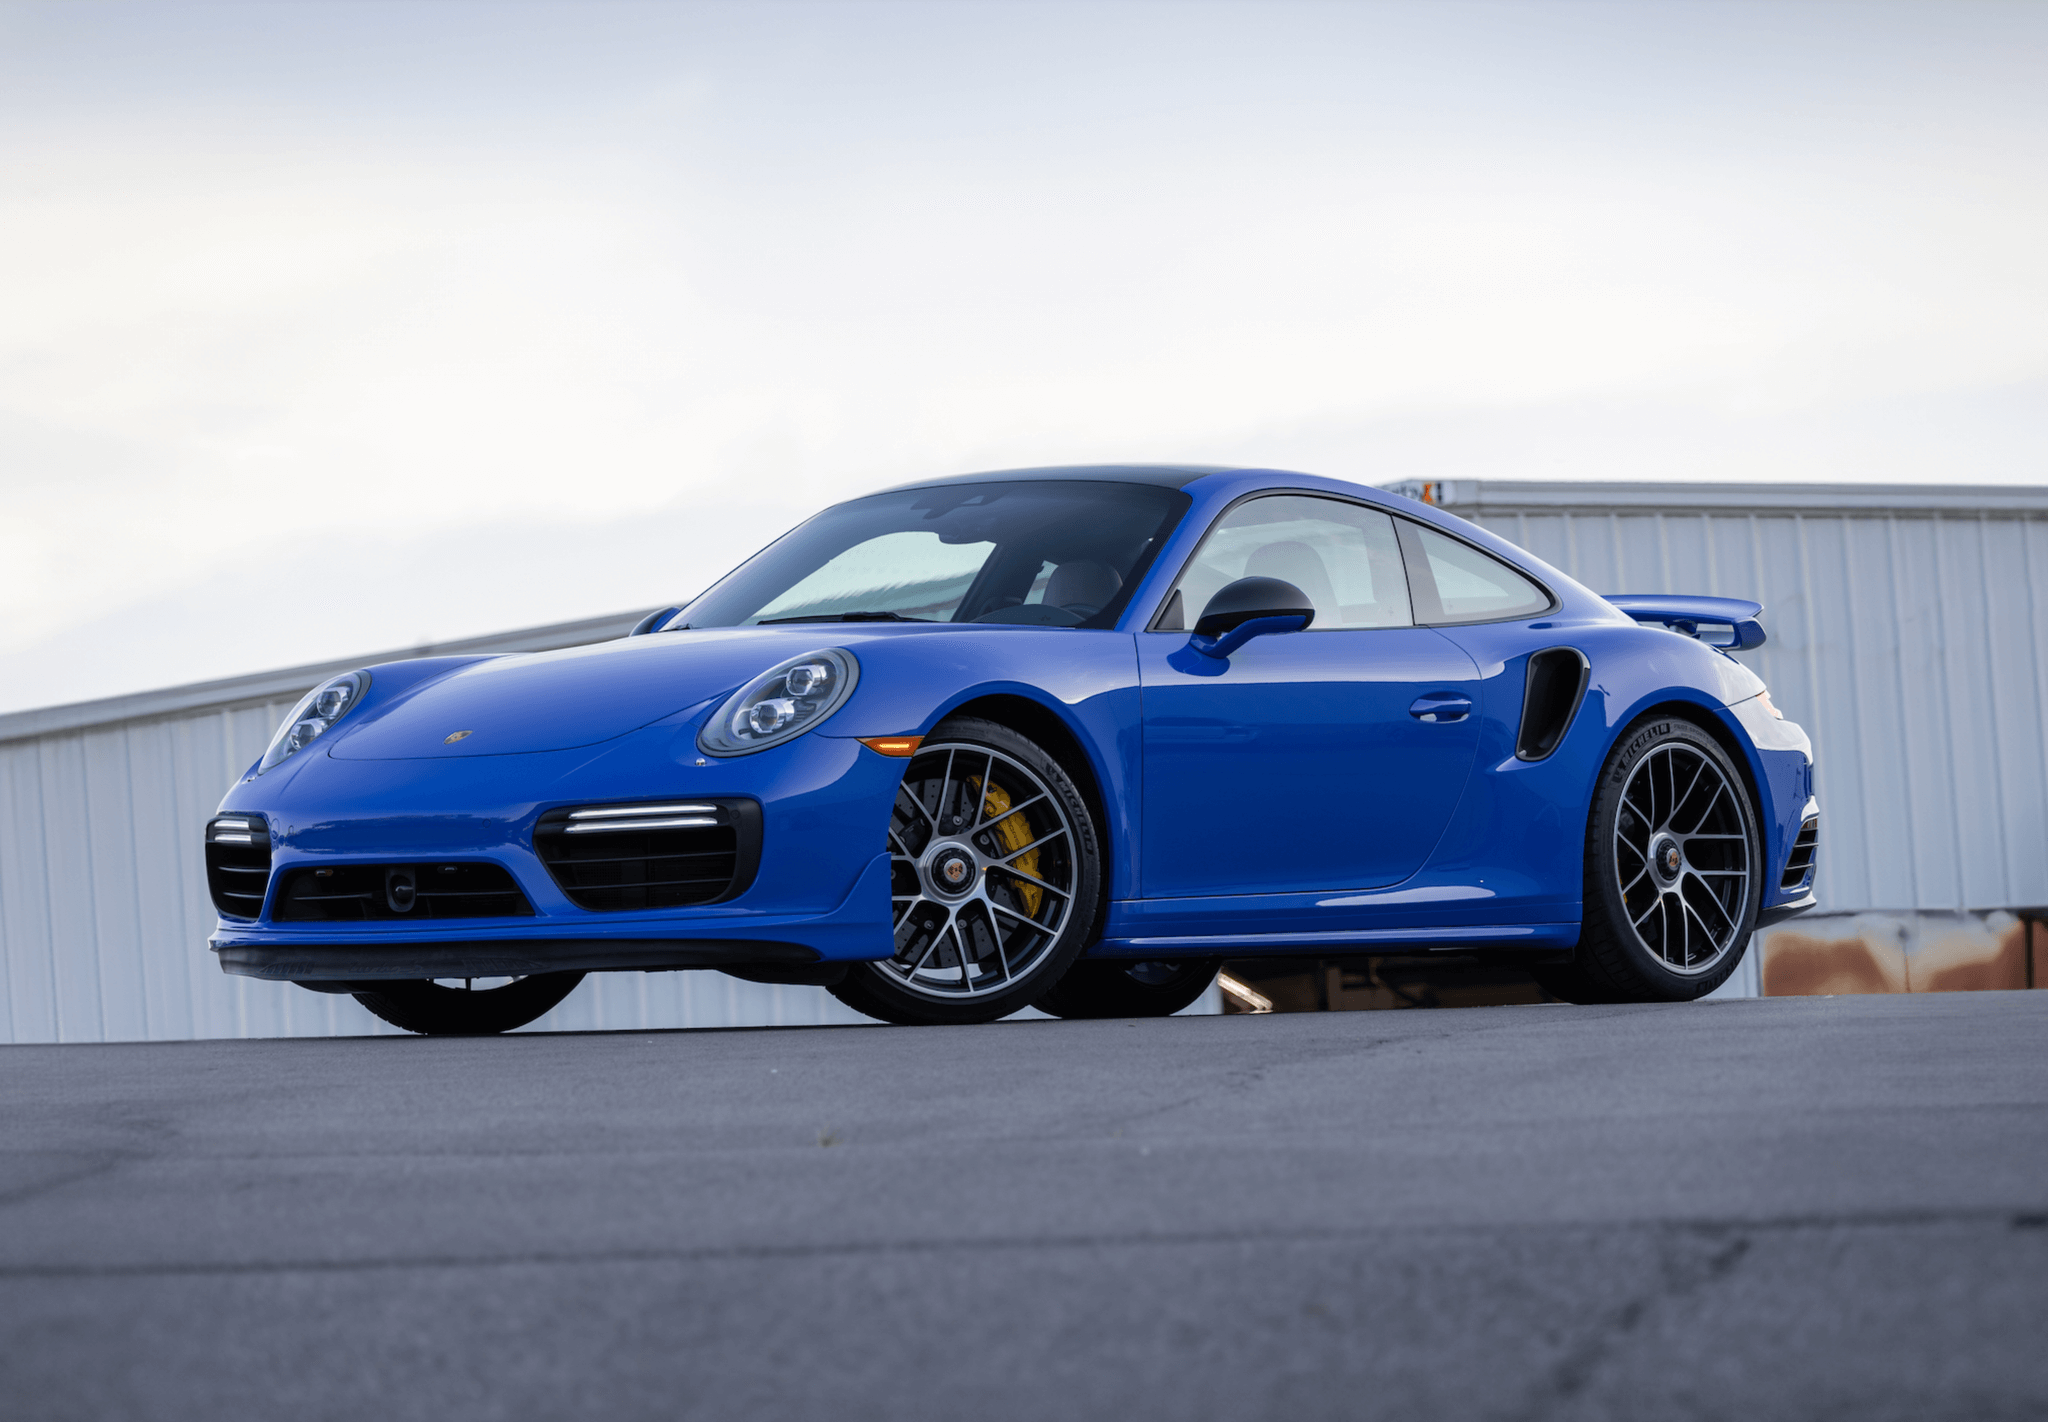 handpicked, sports, american, news, newsletter, highlights, muscle, client, classic, modern classic, europe, features, luxury, trucks, celebrity, off-road, german, pcarmarket is selling a 2018 porsche 991 turbo in paint to sample maritime blue